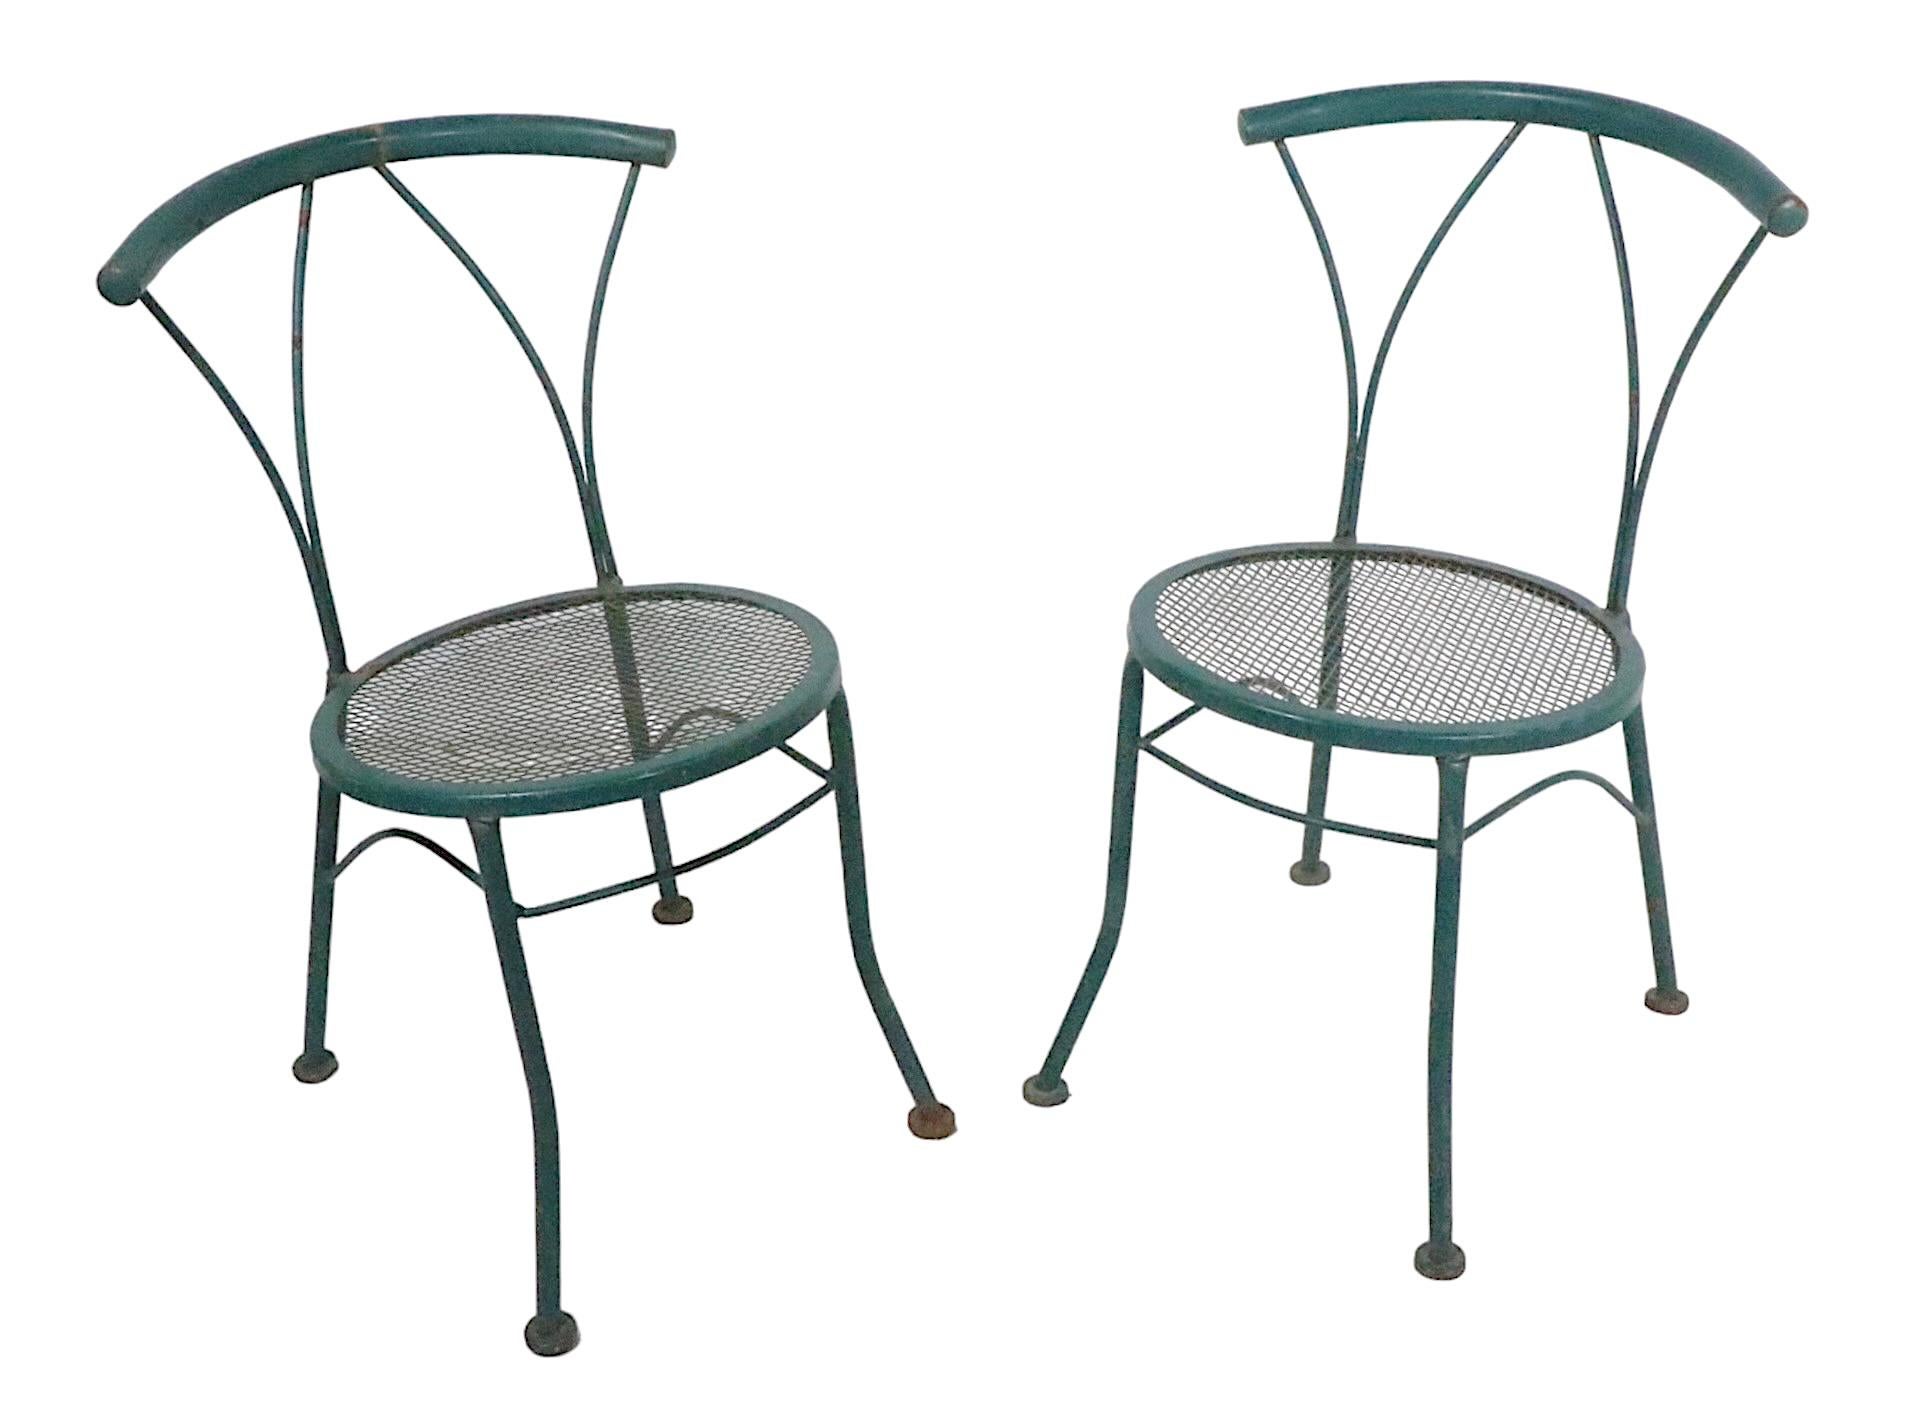 Pr. Wrought Iron and Metal Mesh Garden Patio Poolside Bistro Cafe  Dining Chairs For Sale 6